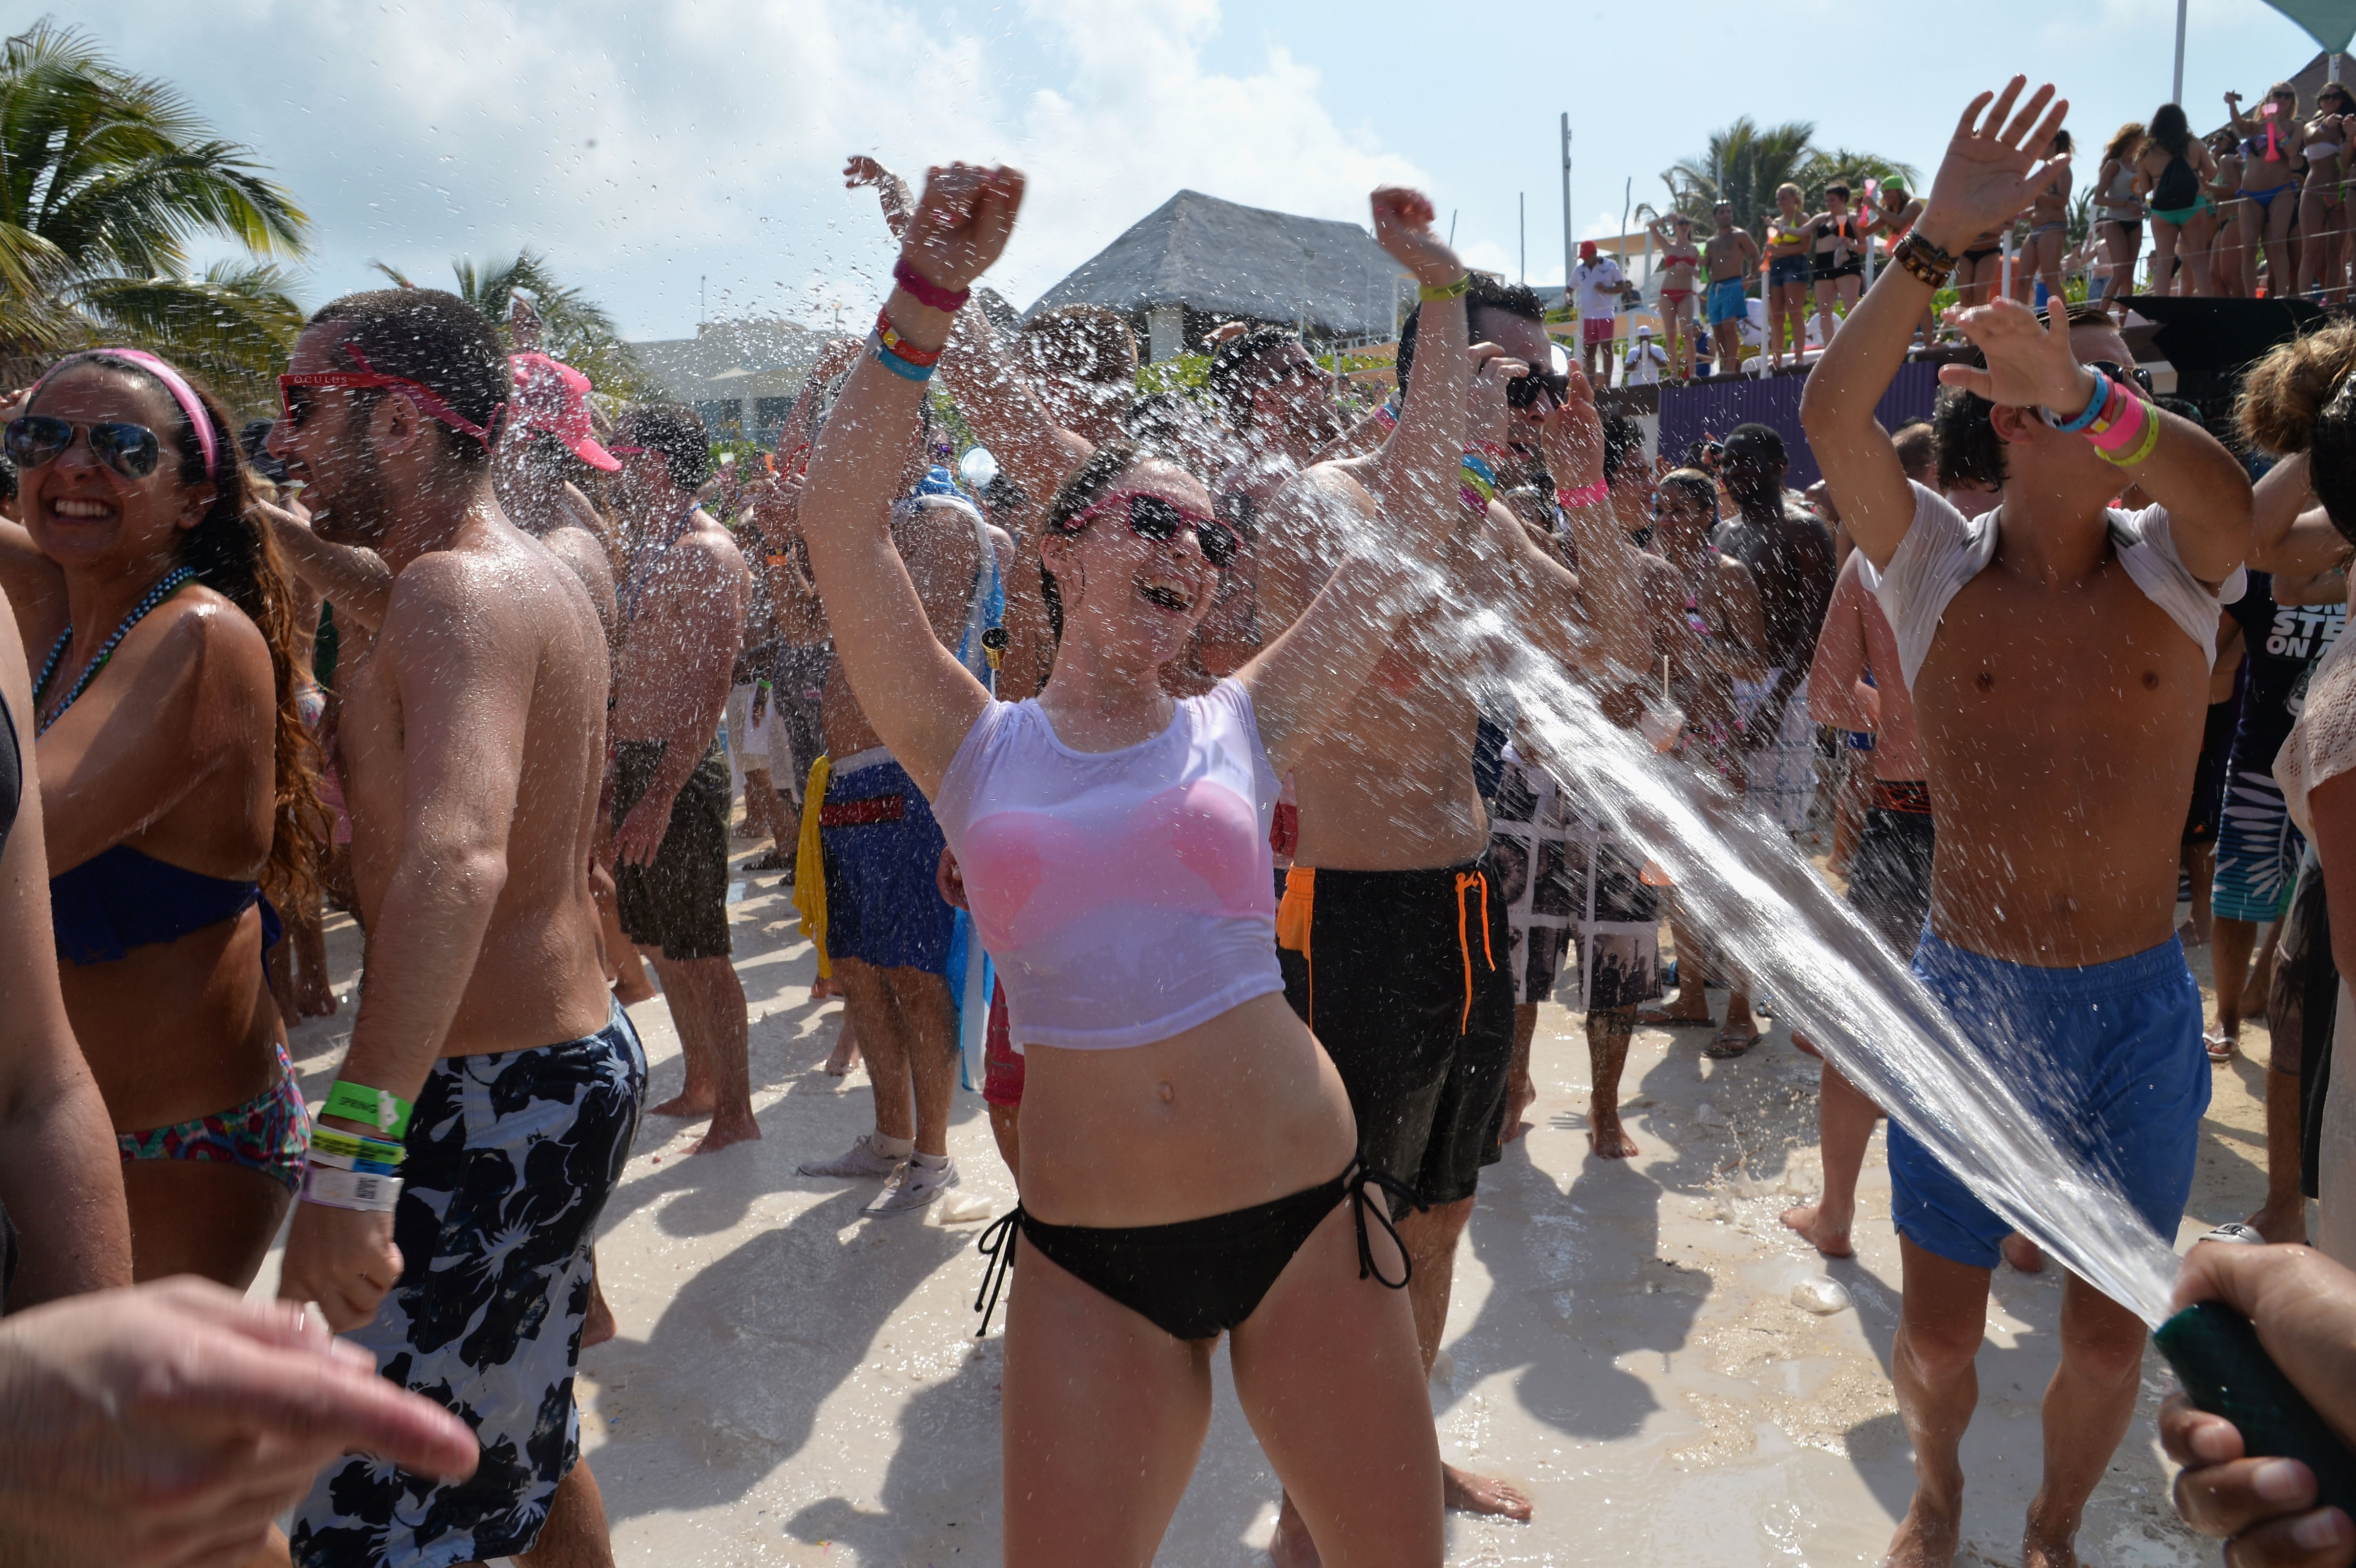 5 Things You Probably Didn't Know About The History Of Spring Break